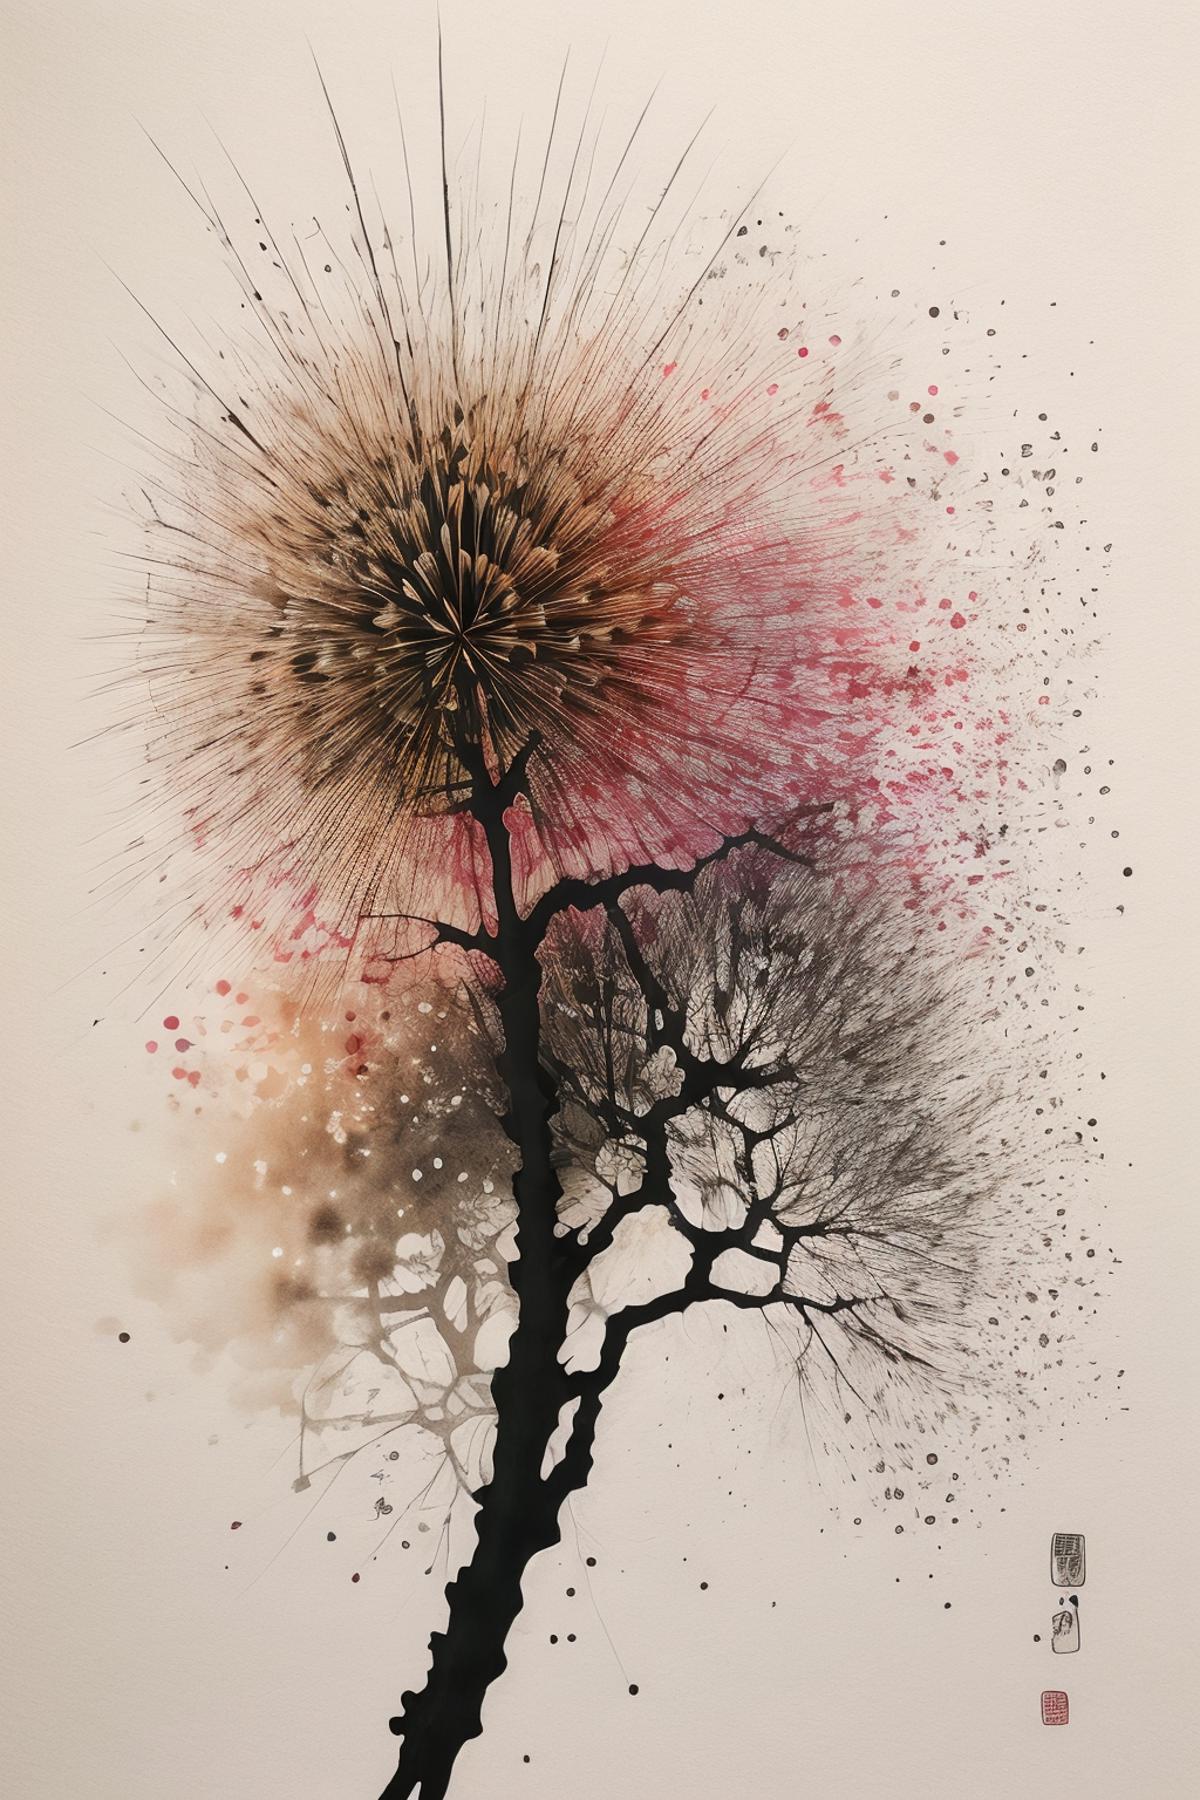 Artwork of a Tree Branch with Pink and Brown Flowers